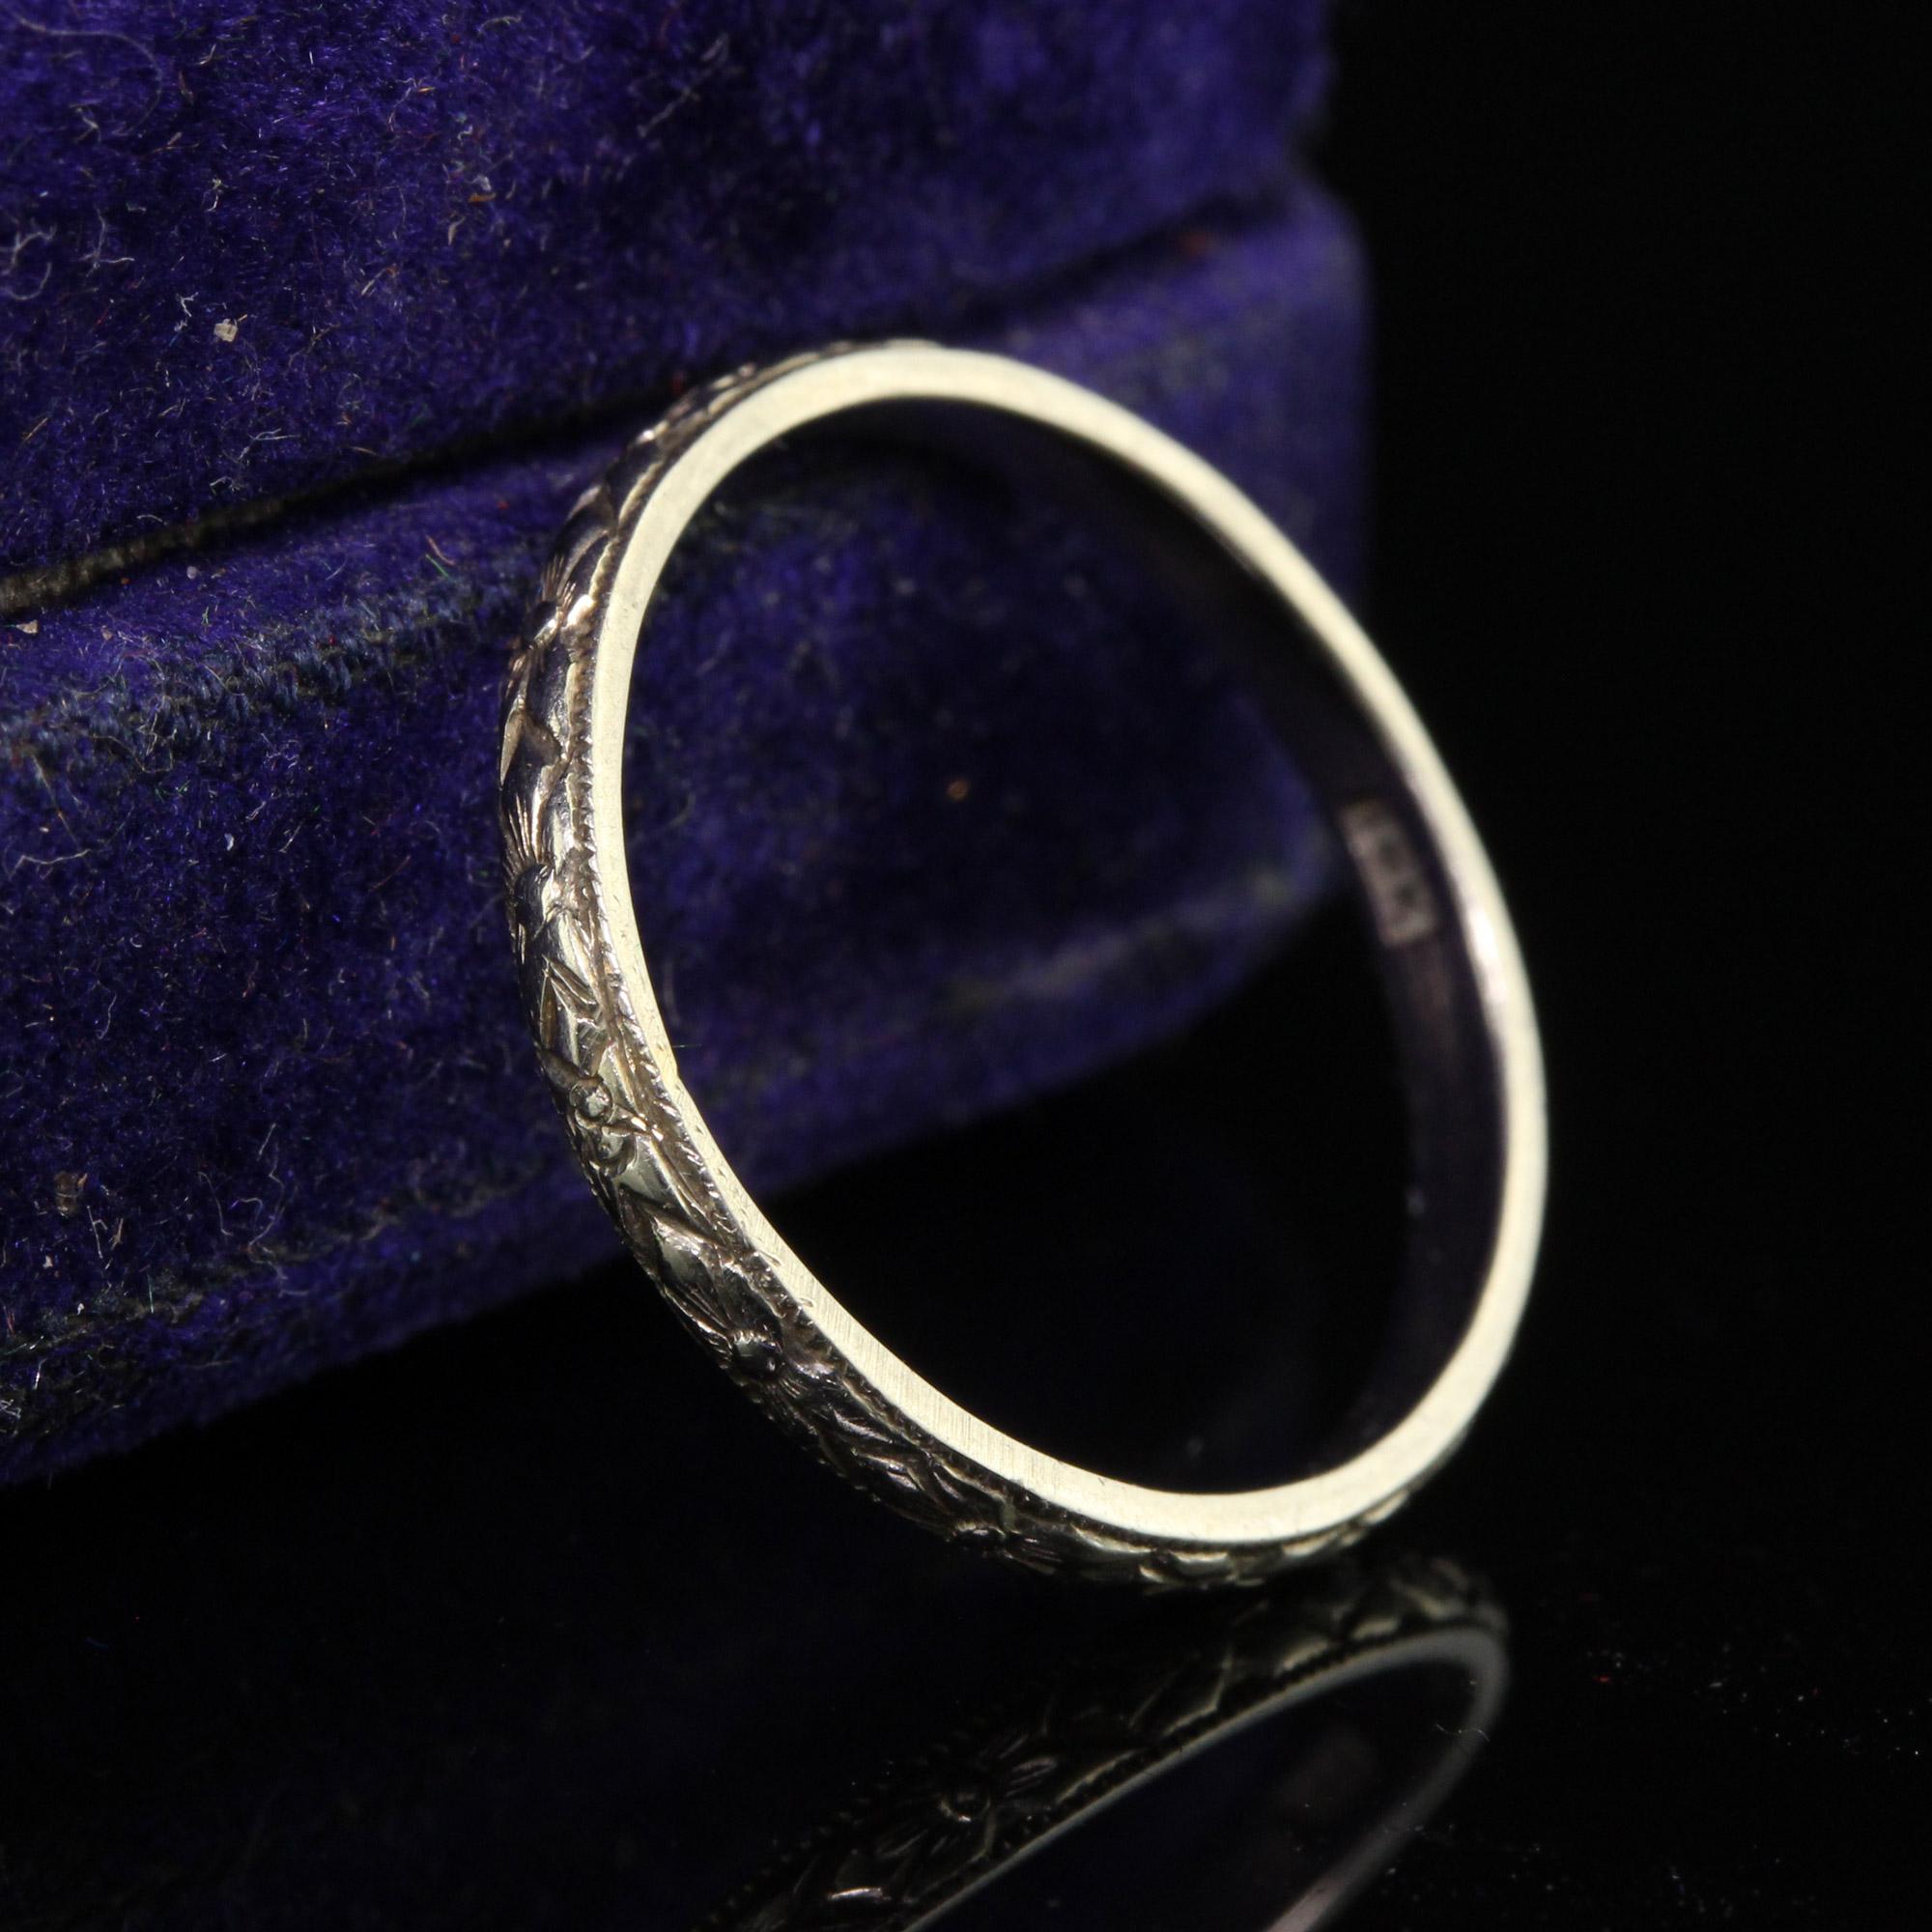 Antique Art Deco 18K White Gold Engraved Wedding Band - Size 5 1/2 In Good Condition For Sale In Great Neck, NY